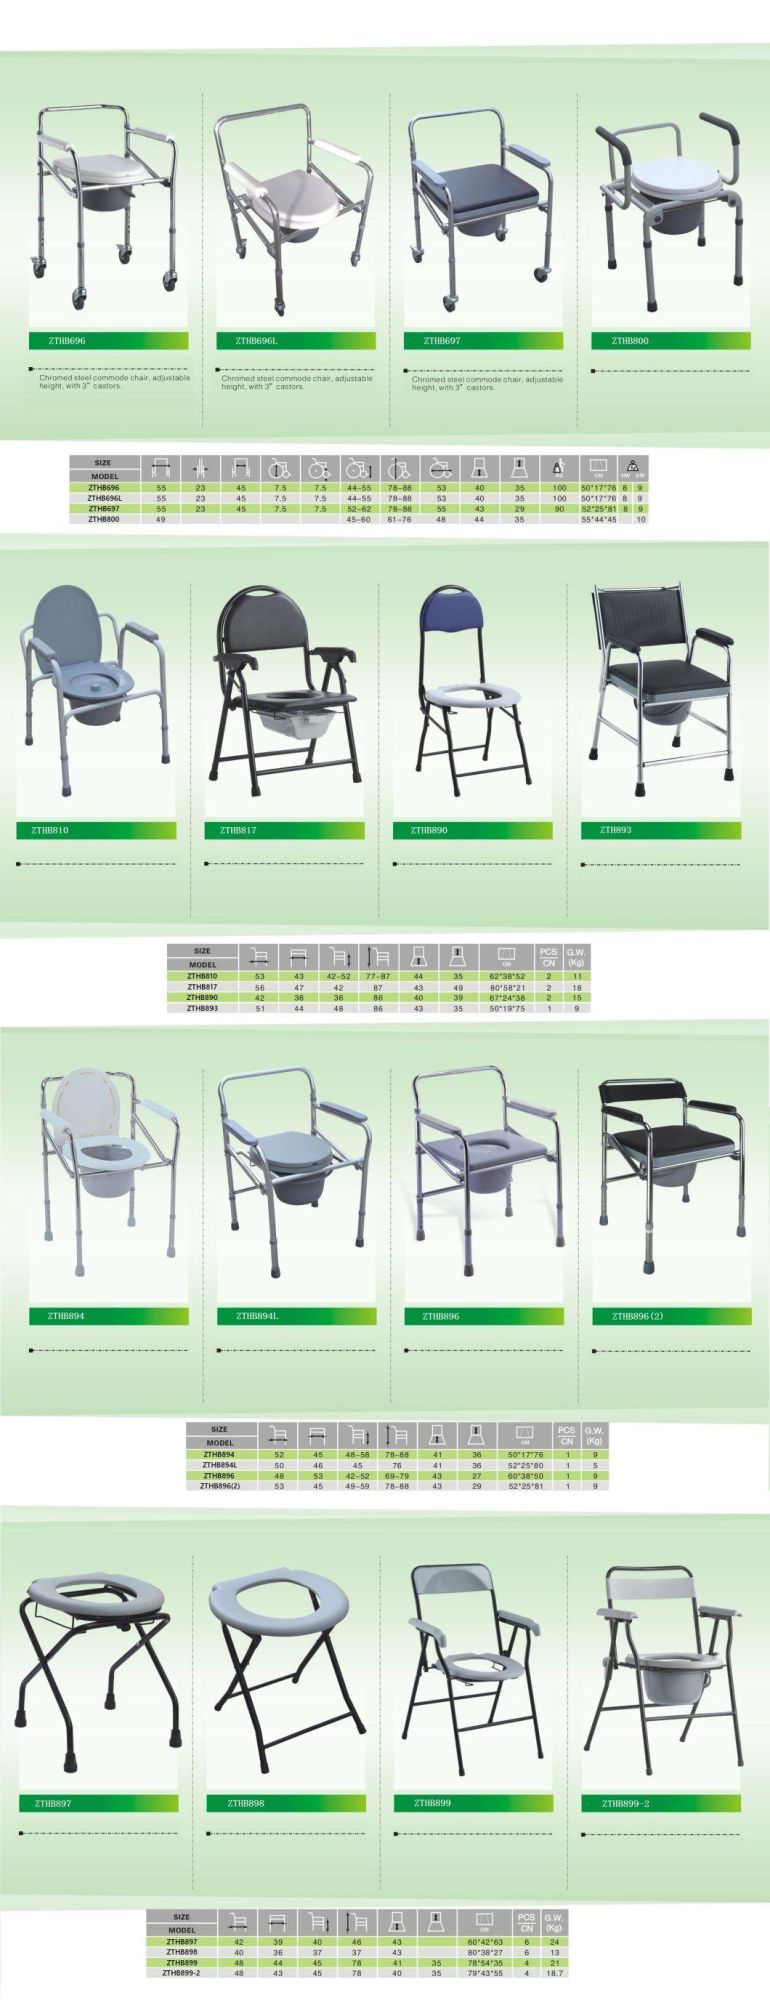 Folding Commode Chair Light Weight Medical Appliances Steel Chair with Bucket with Backrest High Quality Cheapest Price for Disabled People